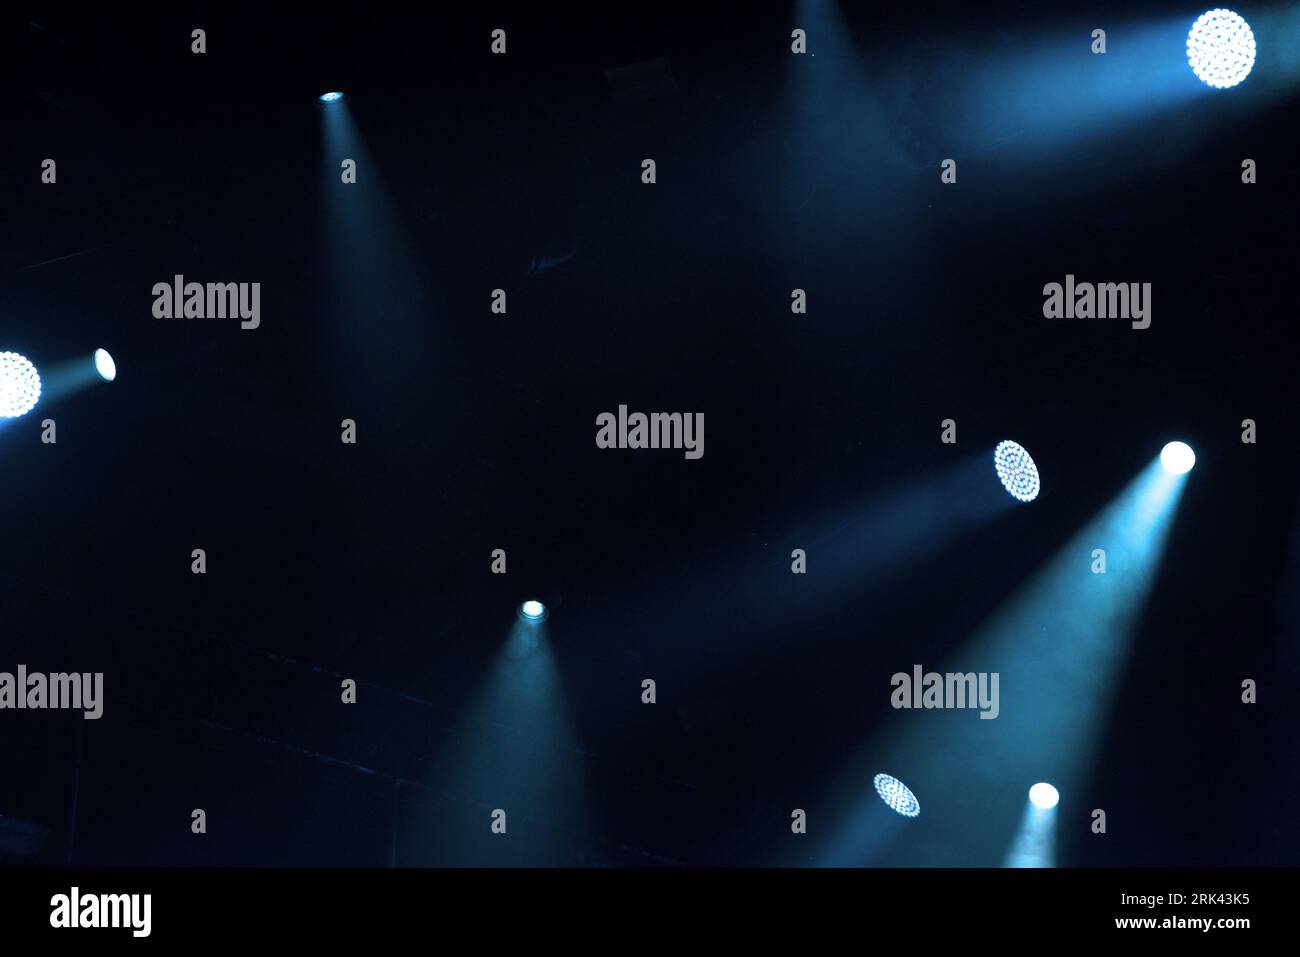 Stage lights in the dark. Live music festival concept background Stock Photo